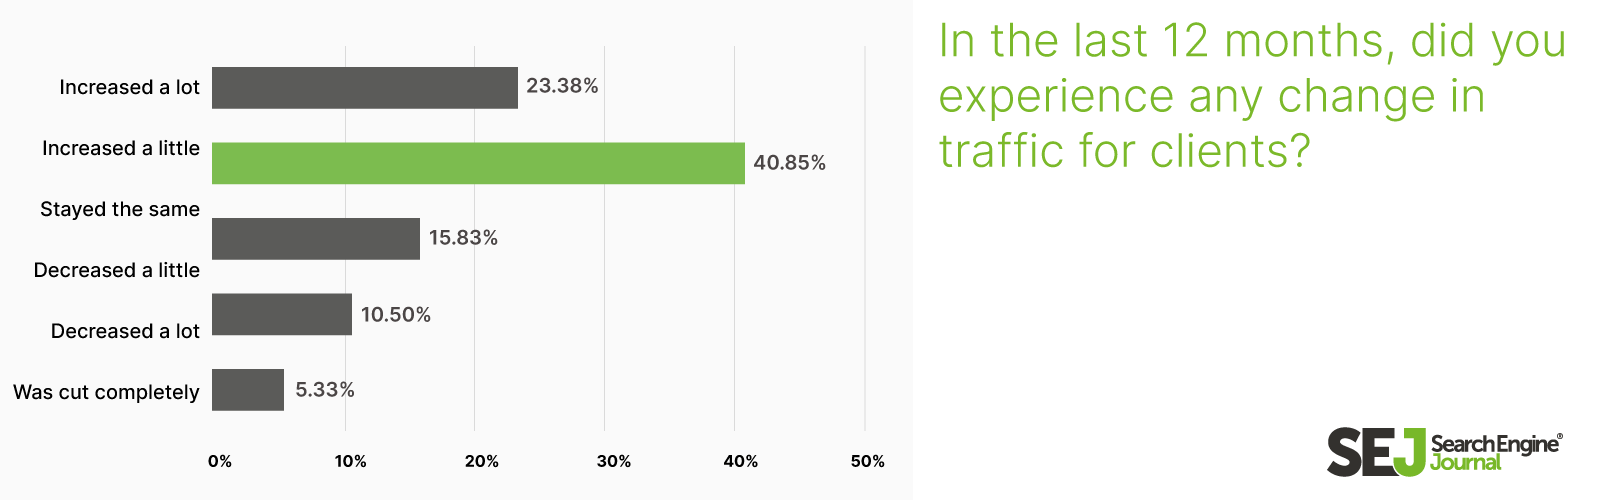 SEO clients traffic changes